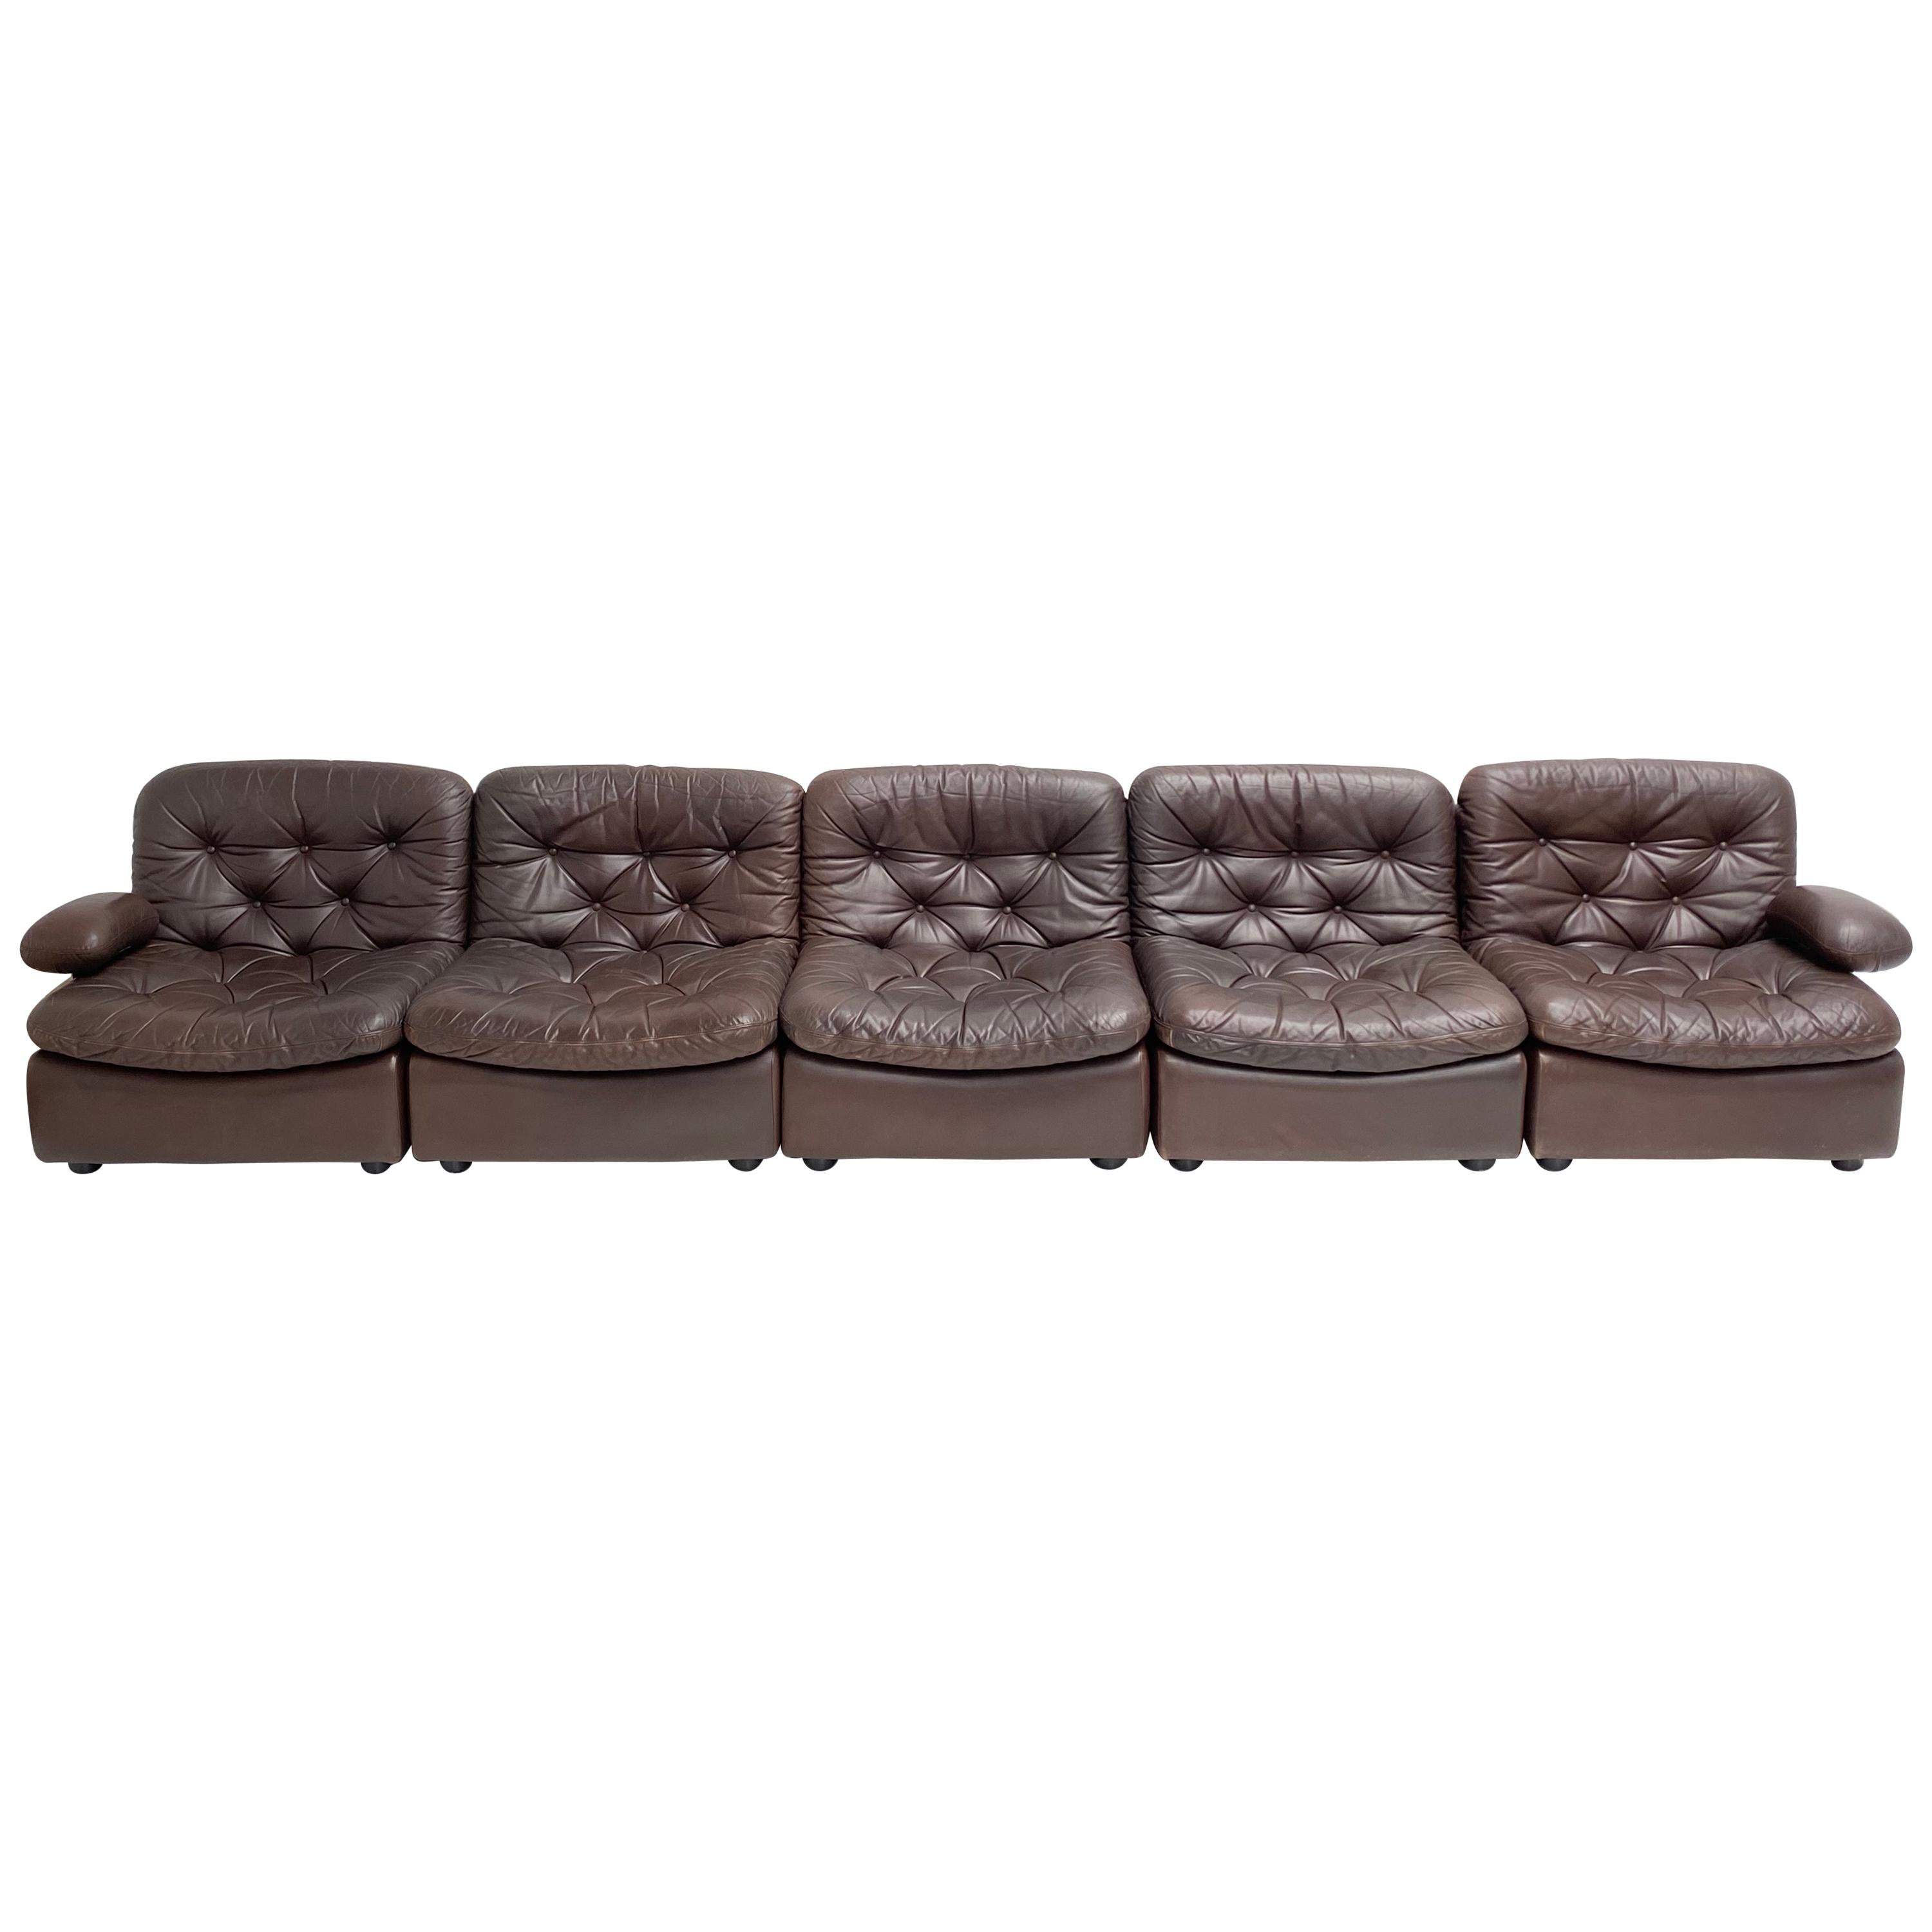 Chocolate Brown Leather 5-Piece Modular Seating System, COR Germany, 1970s